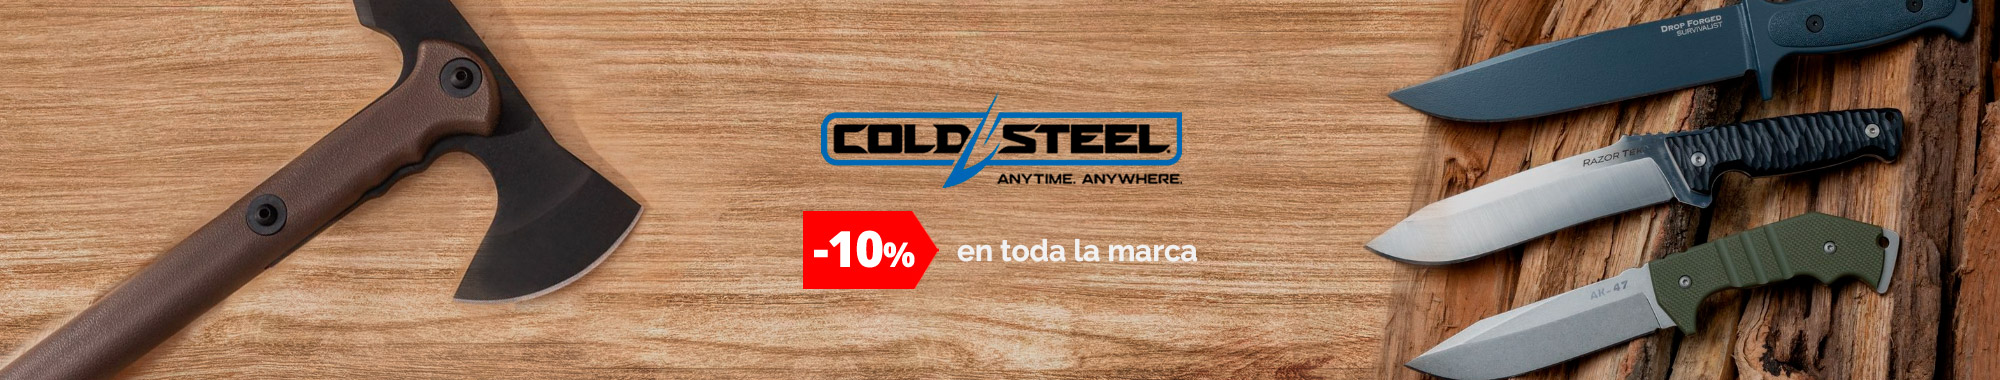 -10% Cold Steel